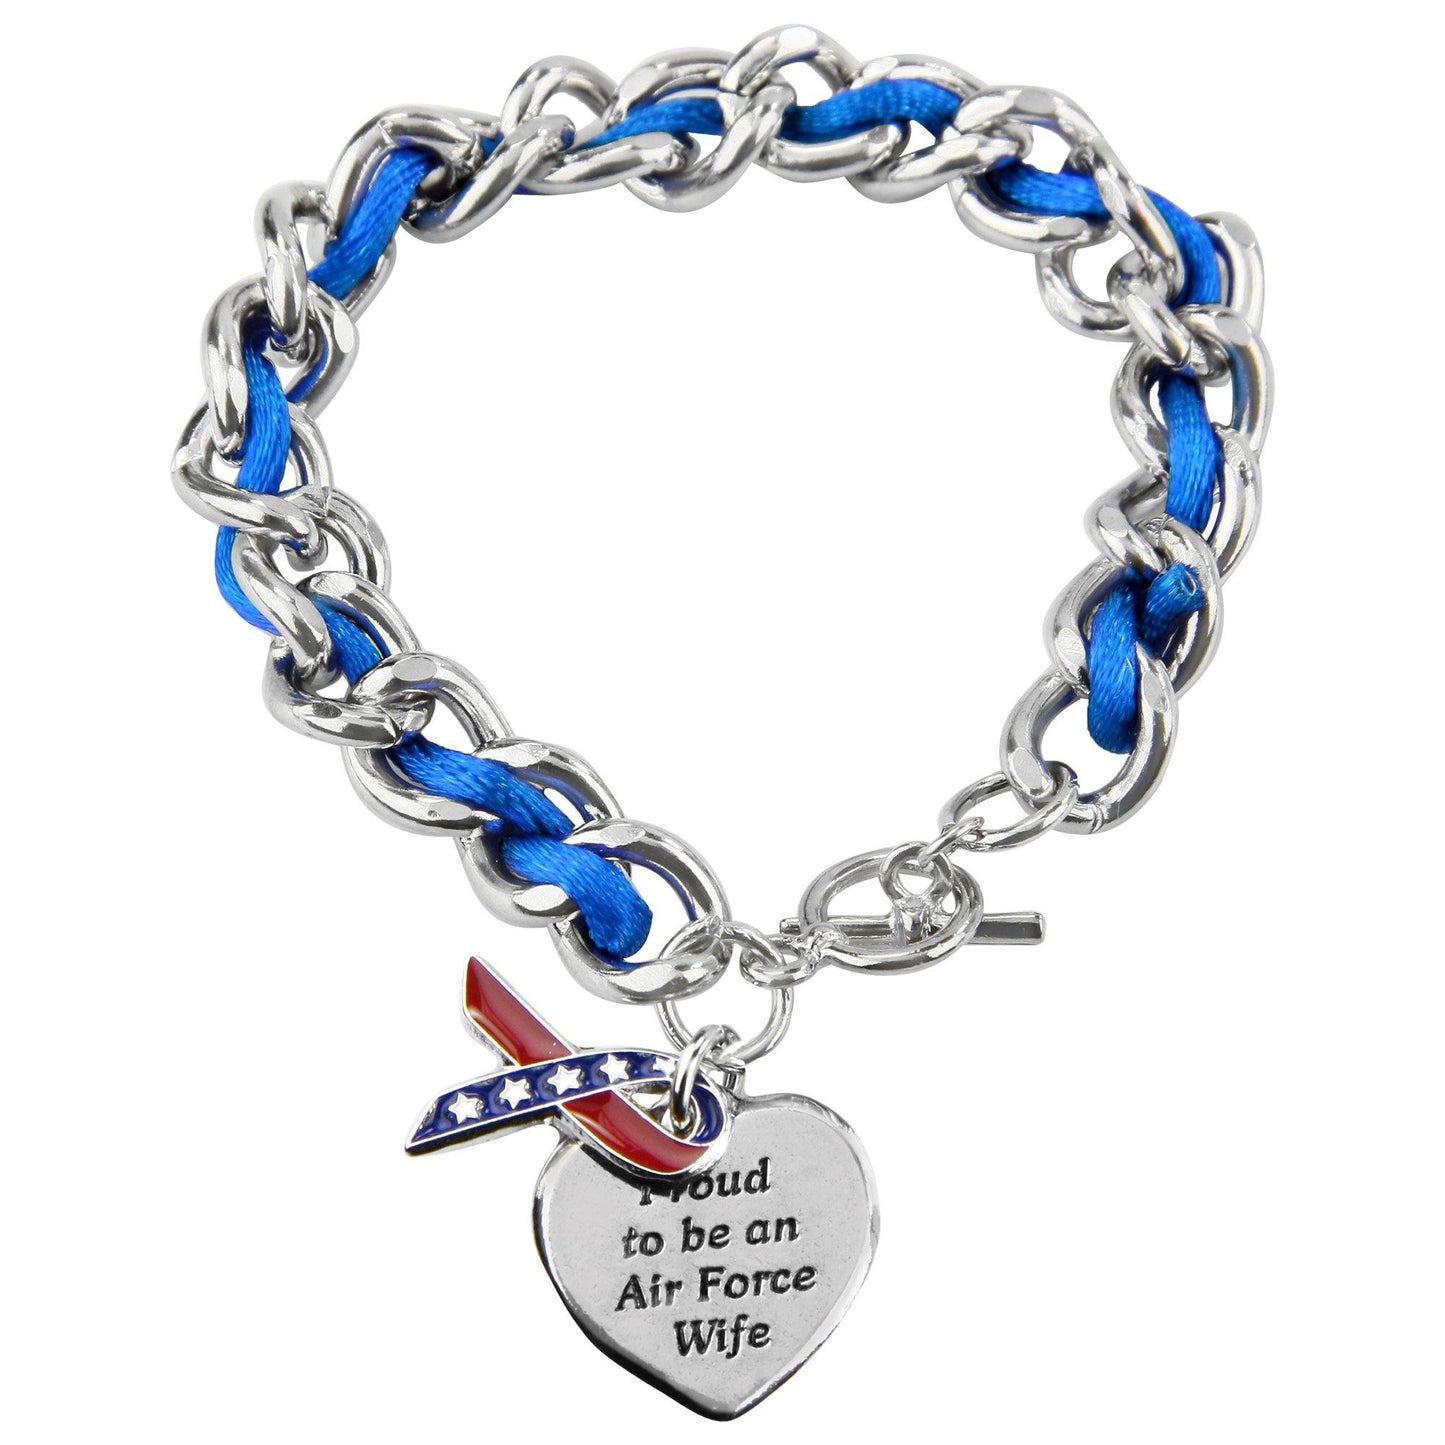 Proud To Be An Air Force Wife Ribbon Charm Bracelet